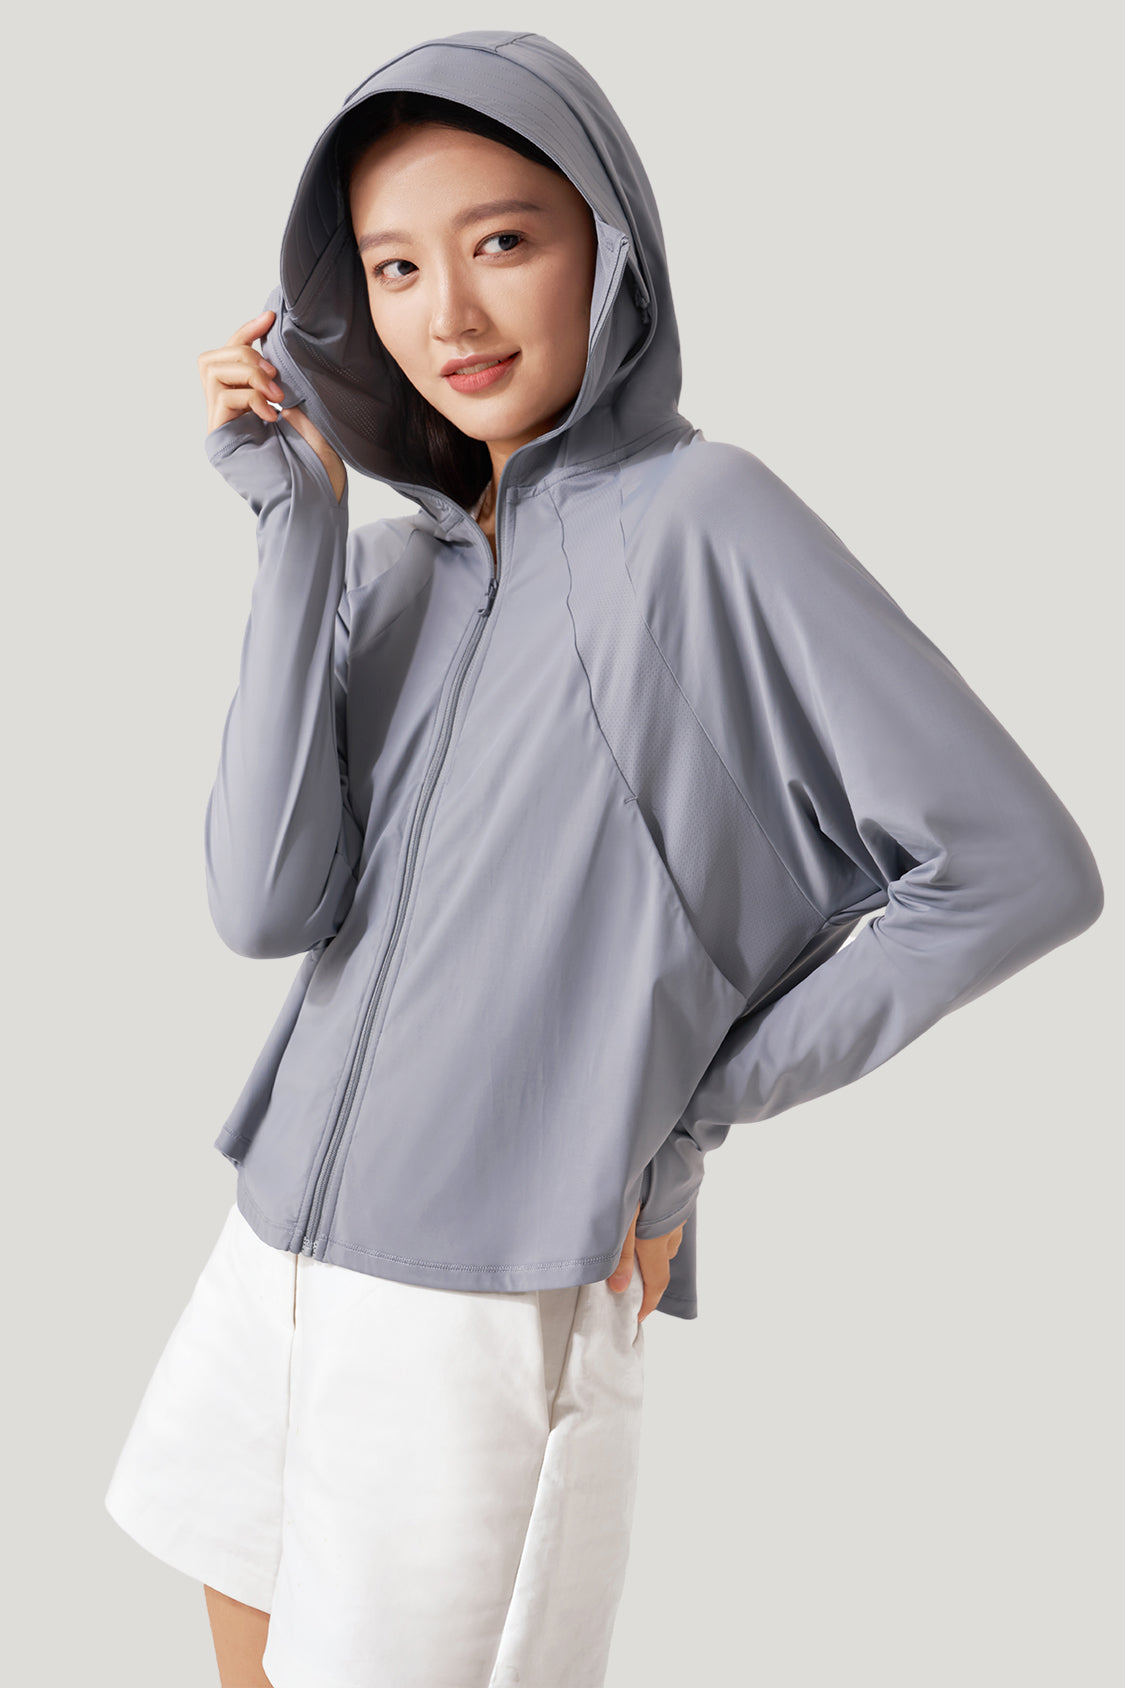 Beneunder Zip Up Hoodie UPF 50+, Sun Protection Cooling Clothes for Women